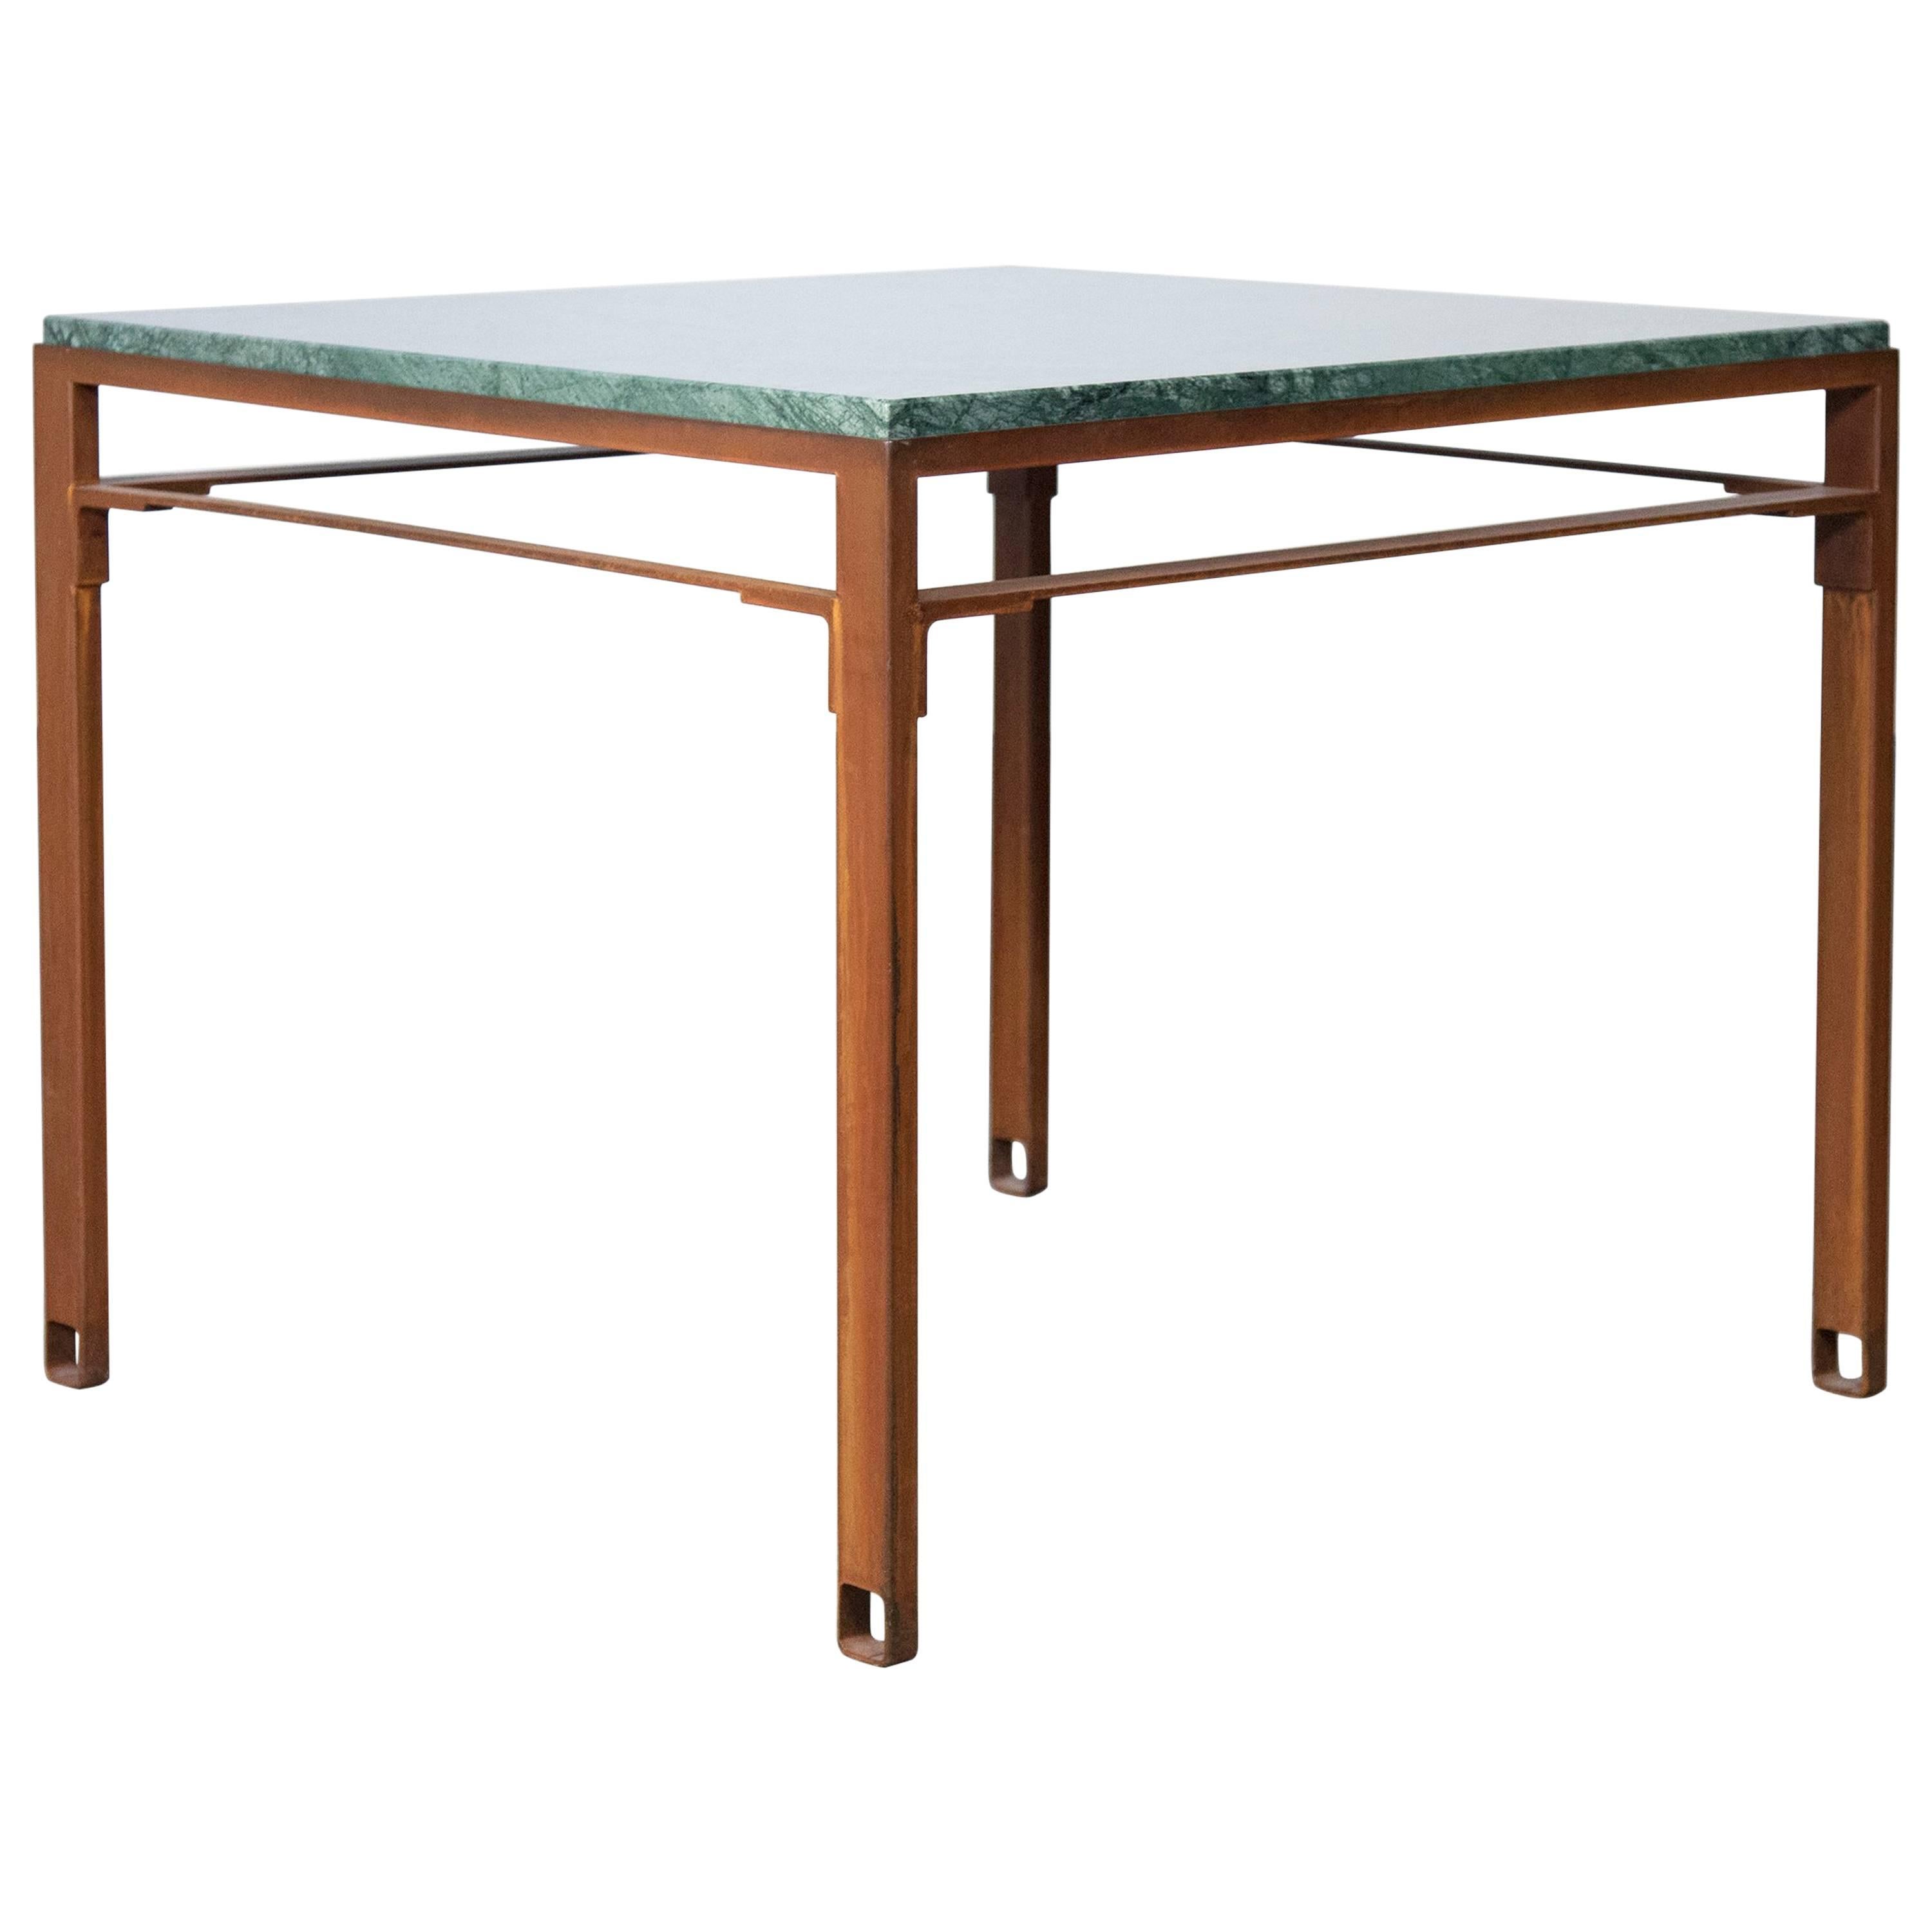 Squares Table in Contemporary Oxidized Steel and Emerald Green Marble